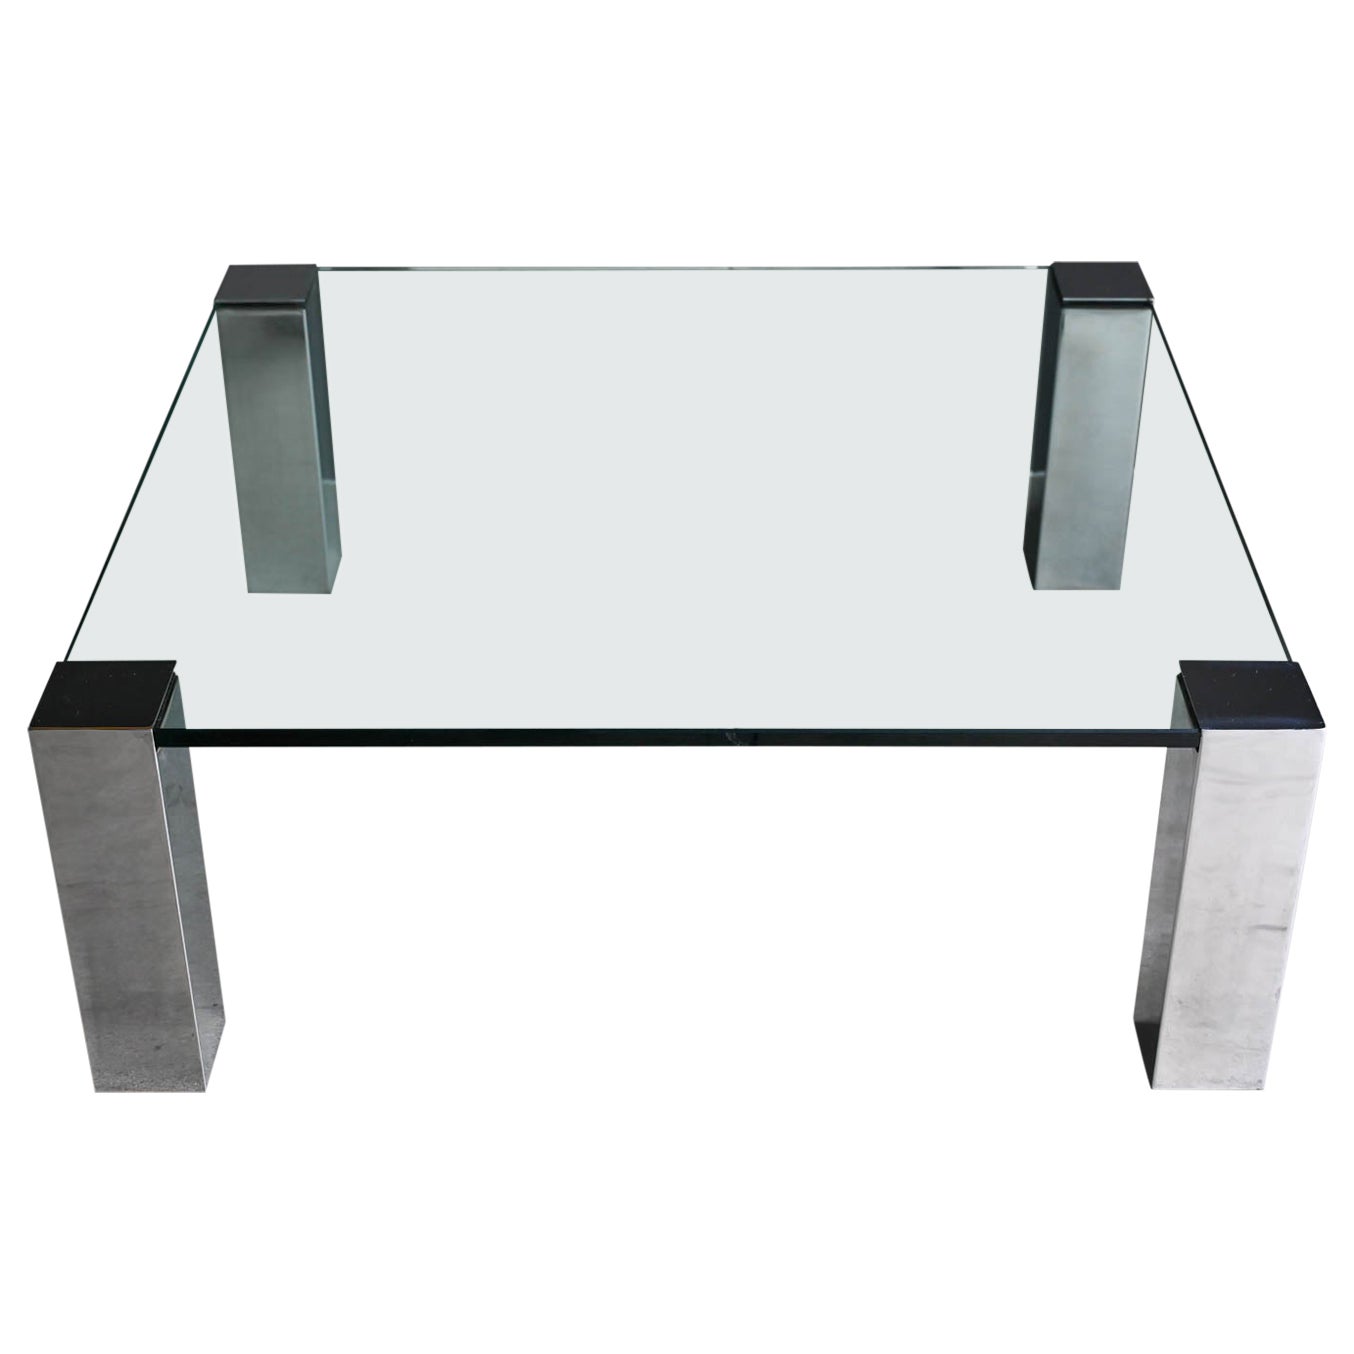 Chrome and Glass Coffee Table by Willy Rizzo for Cidue, Italy ca. 1970 For Sale